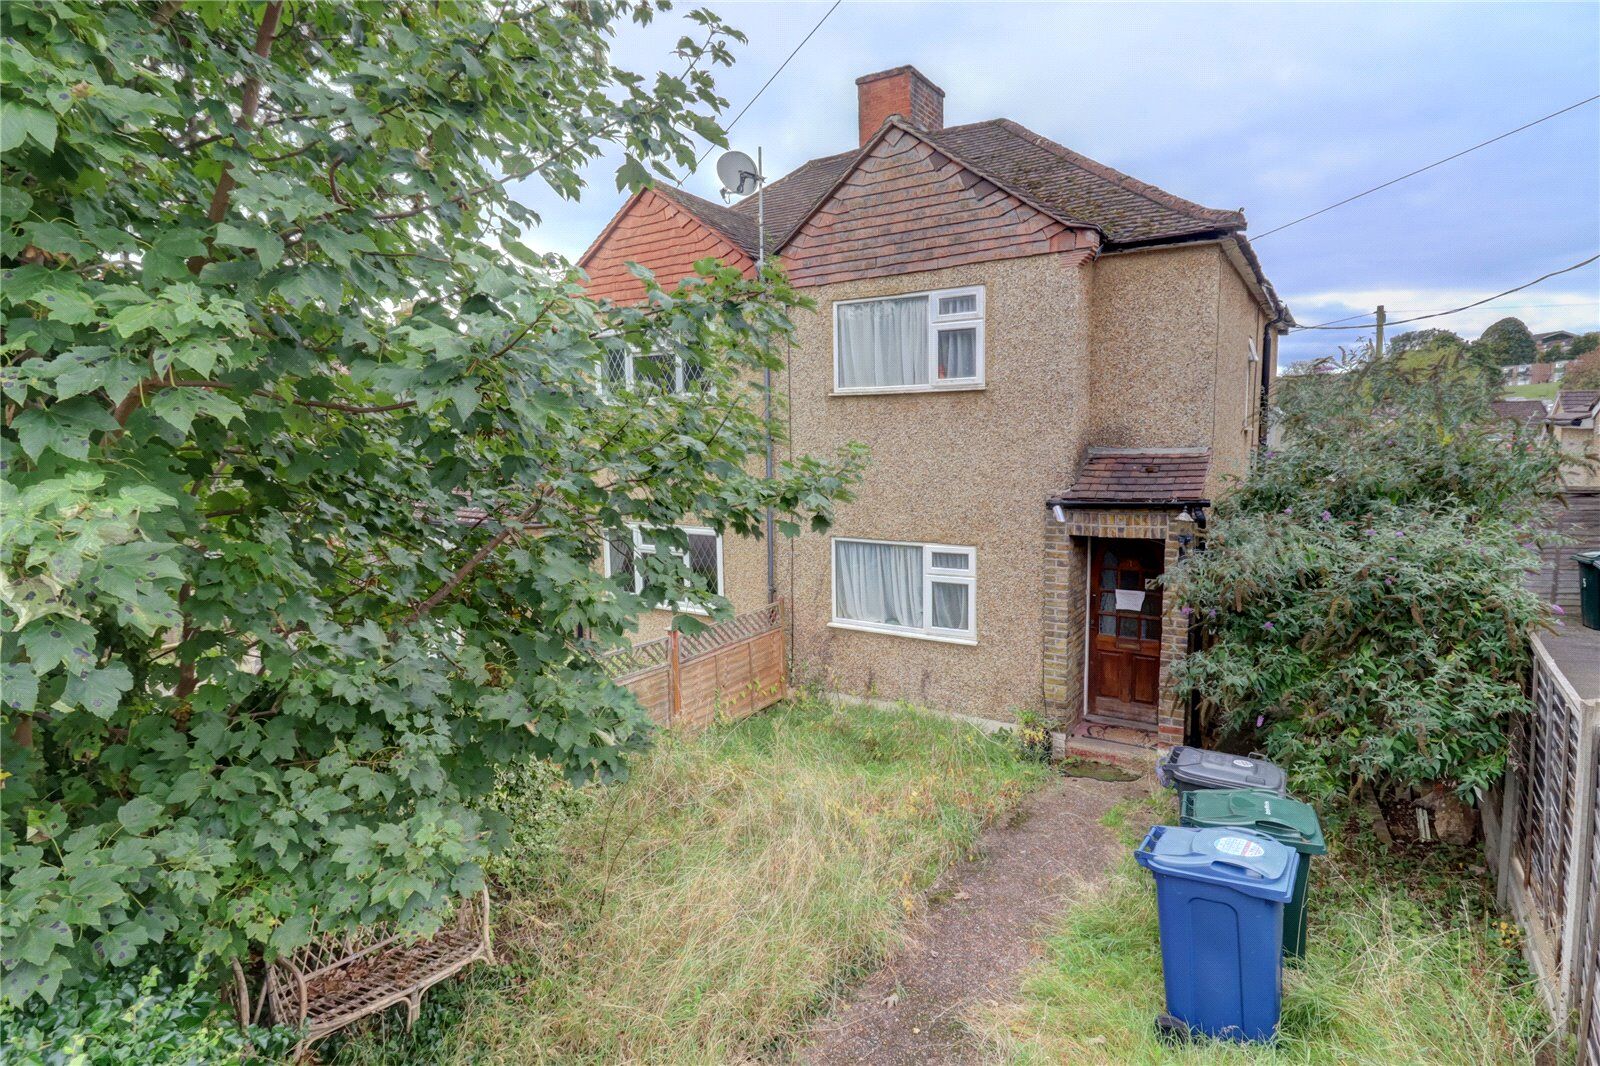 2 bedroom semi detached house for sale Melbourne Road, High Wycombe, HP13, main image